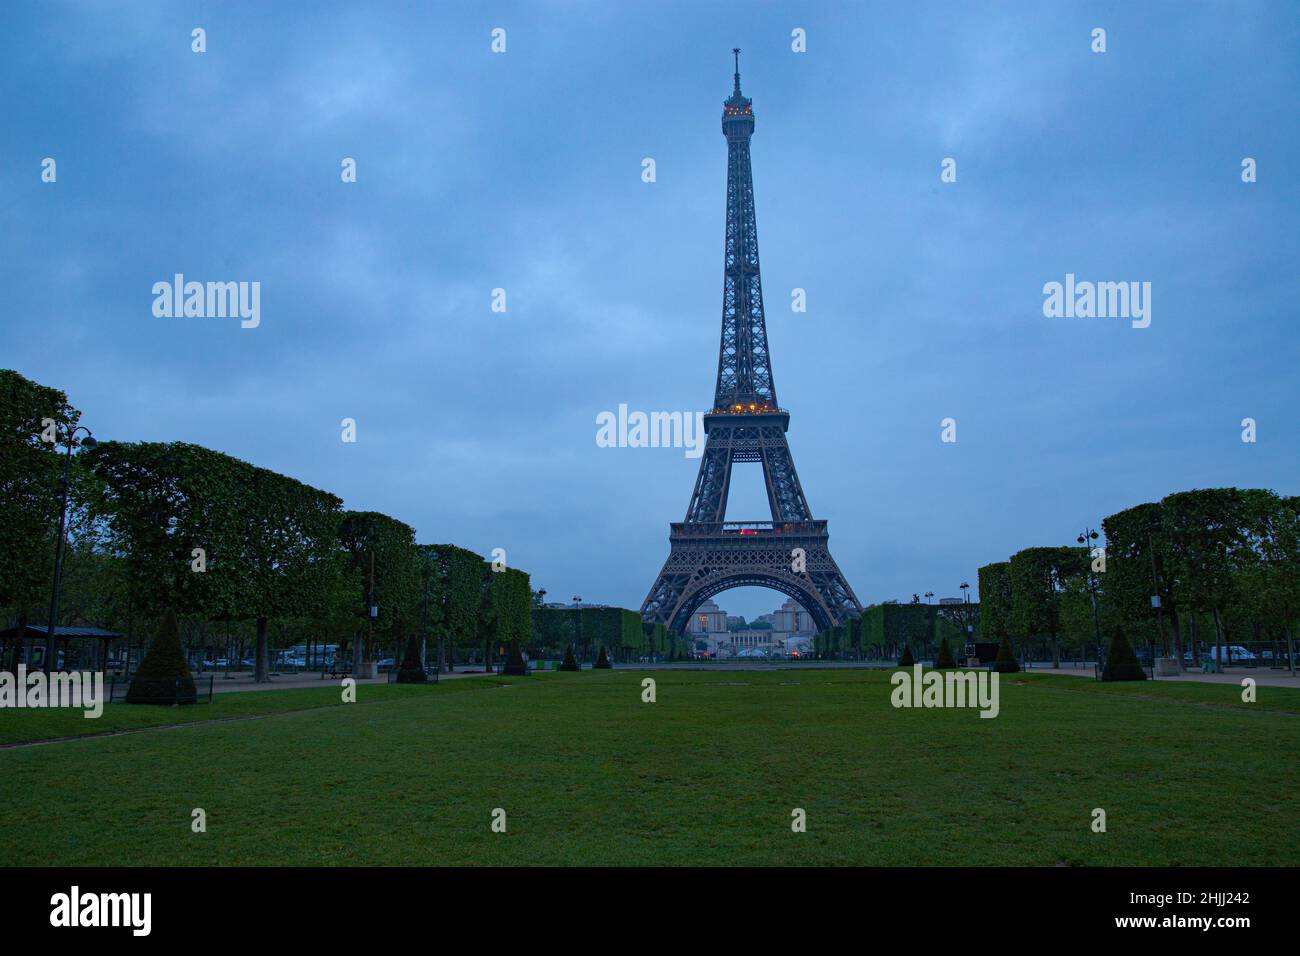 The Eiffel tower on a cold cloudy evening Stock Photo